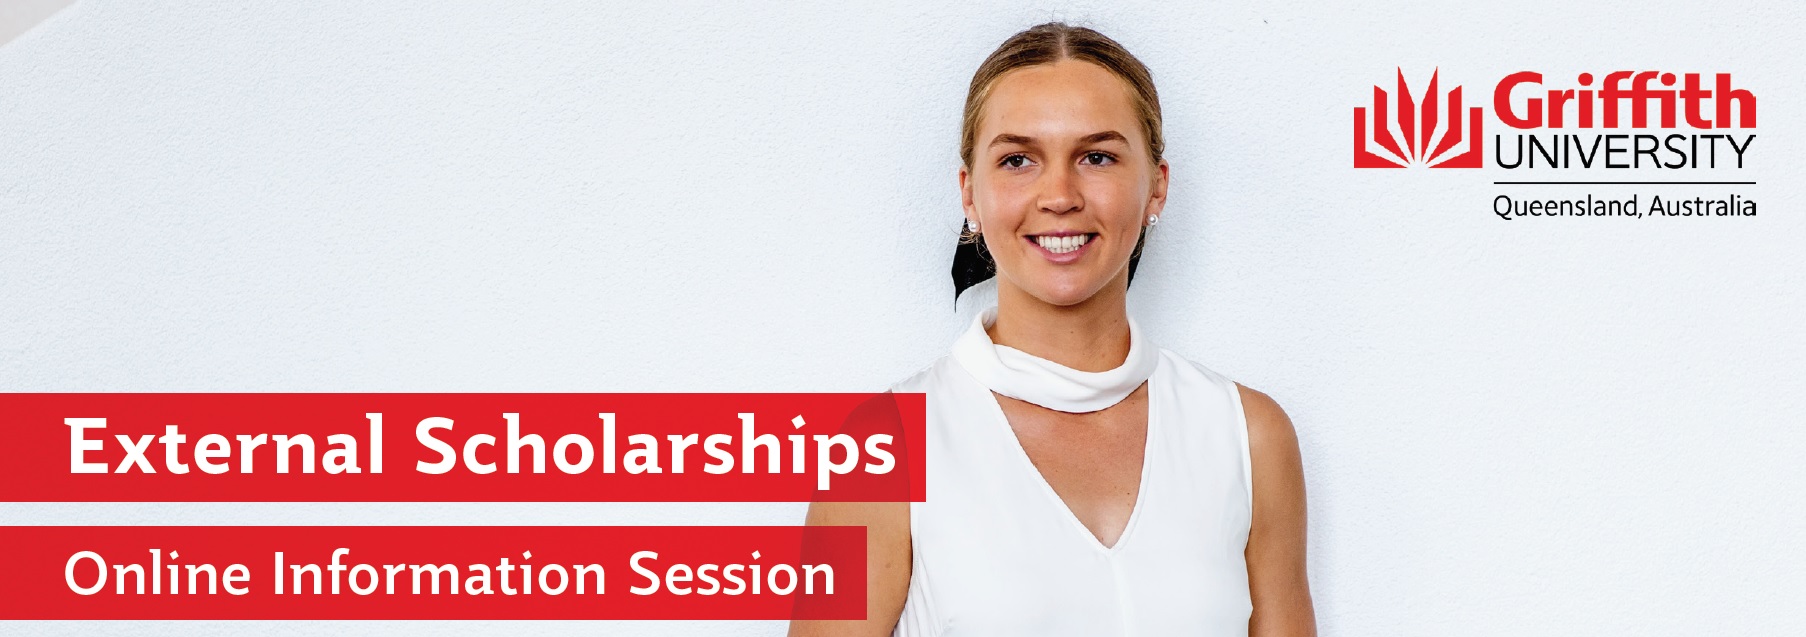 Griffith University External Scholarships Information Session